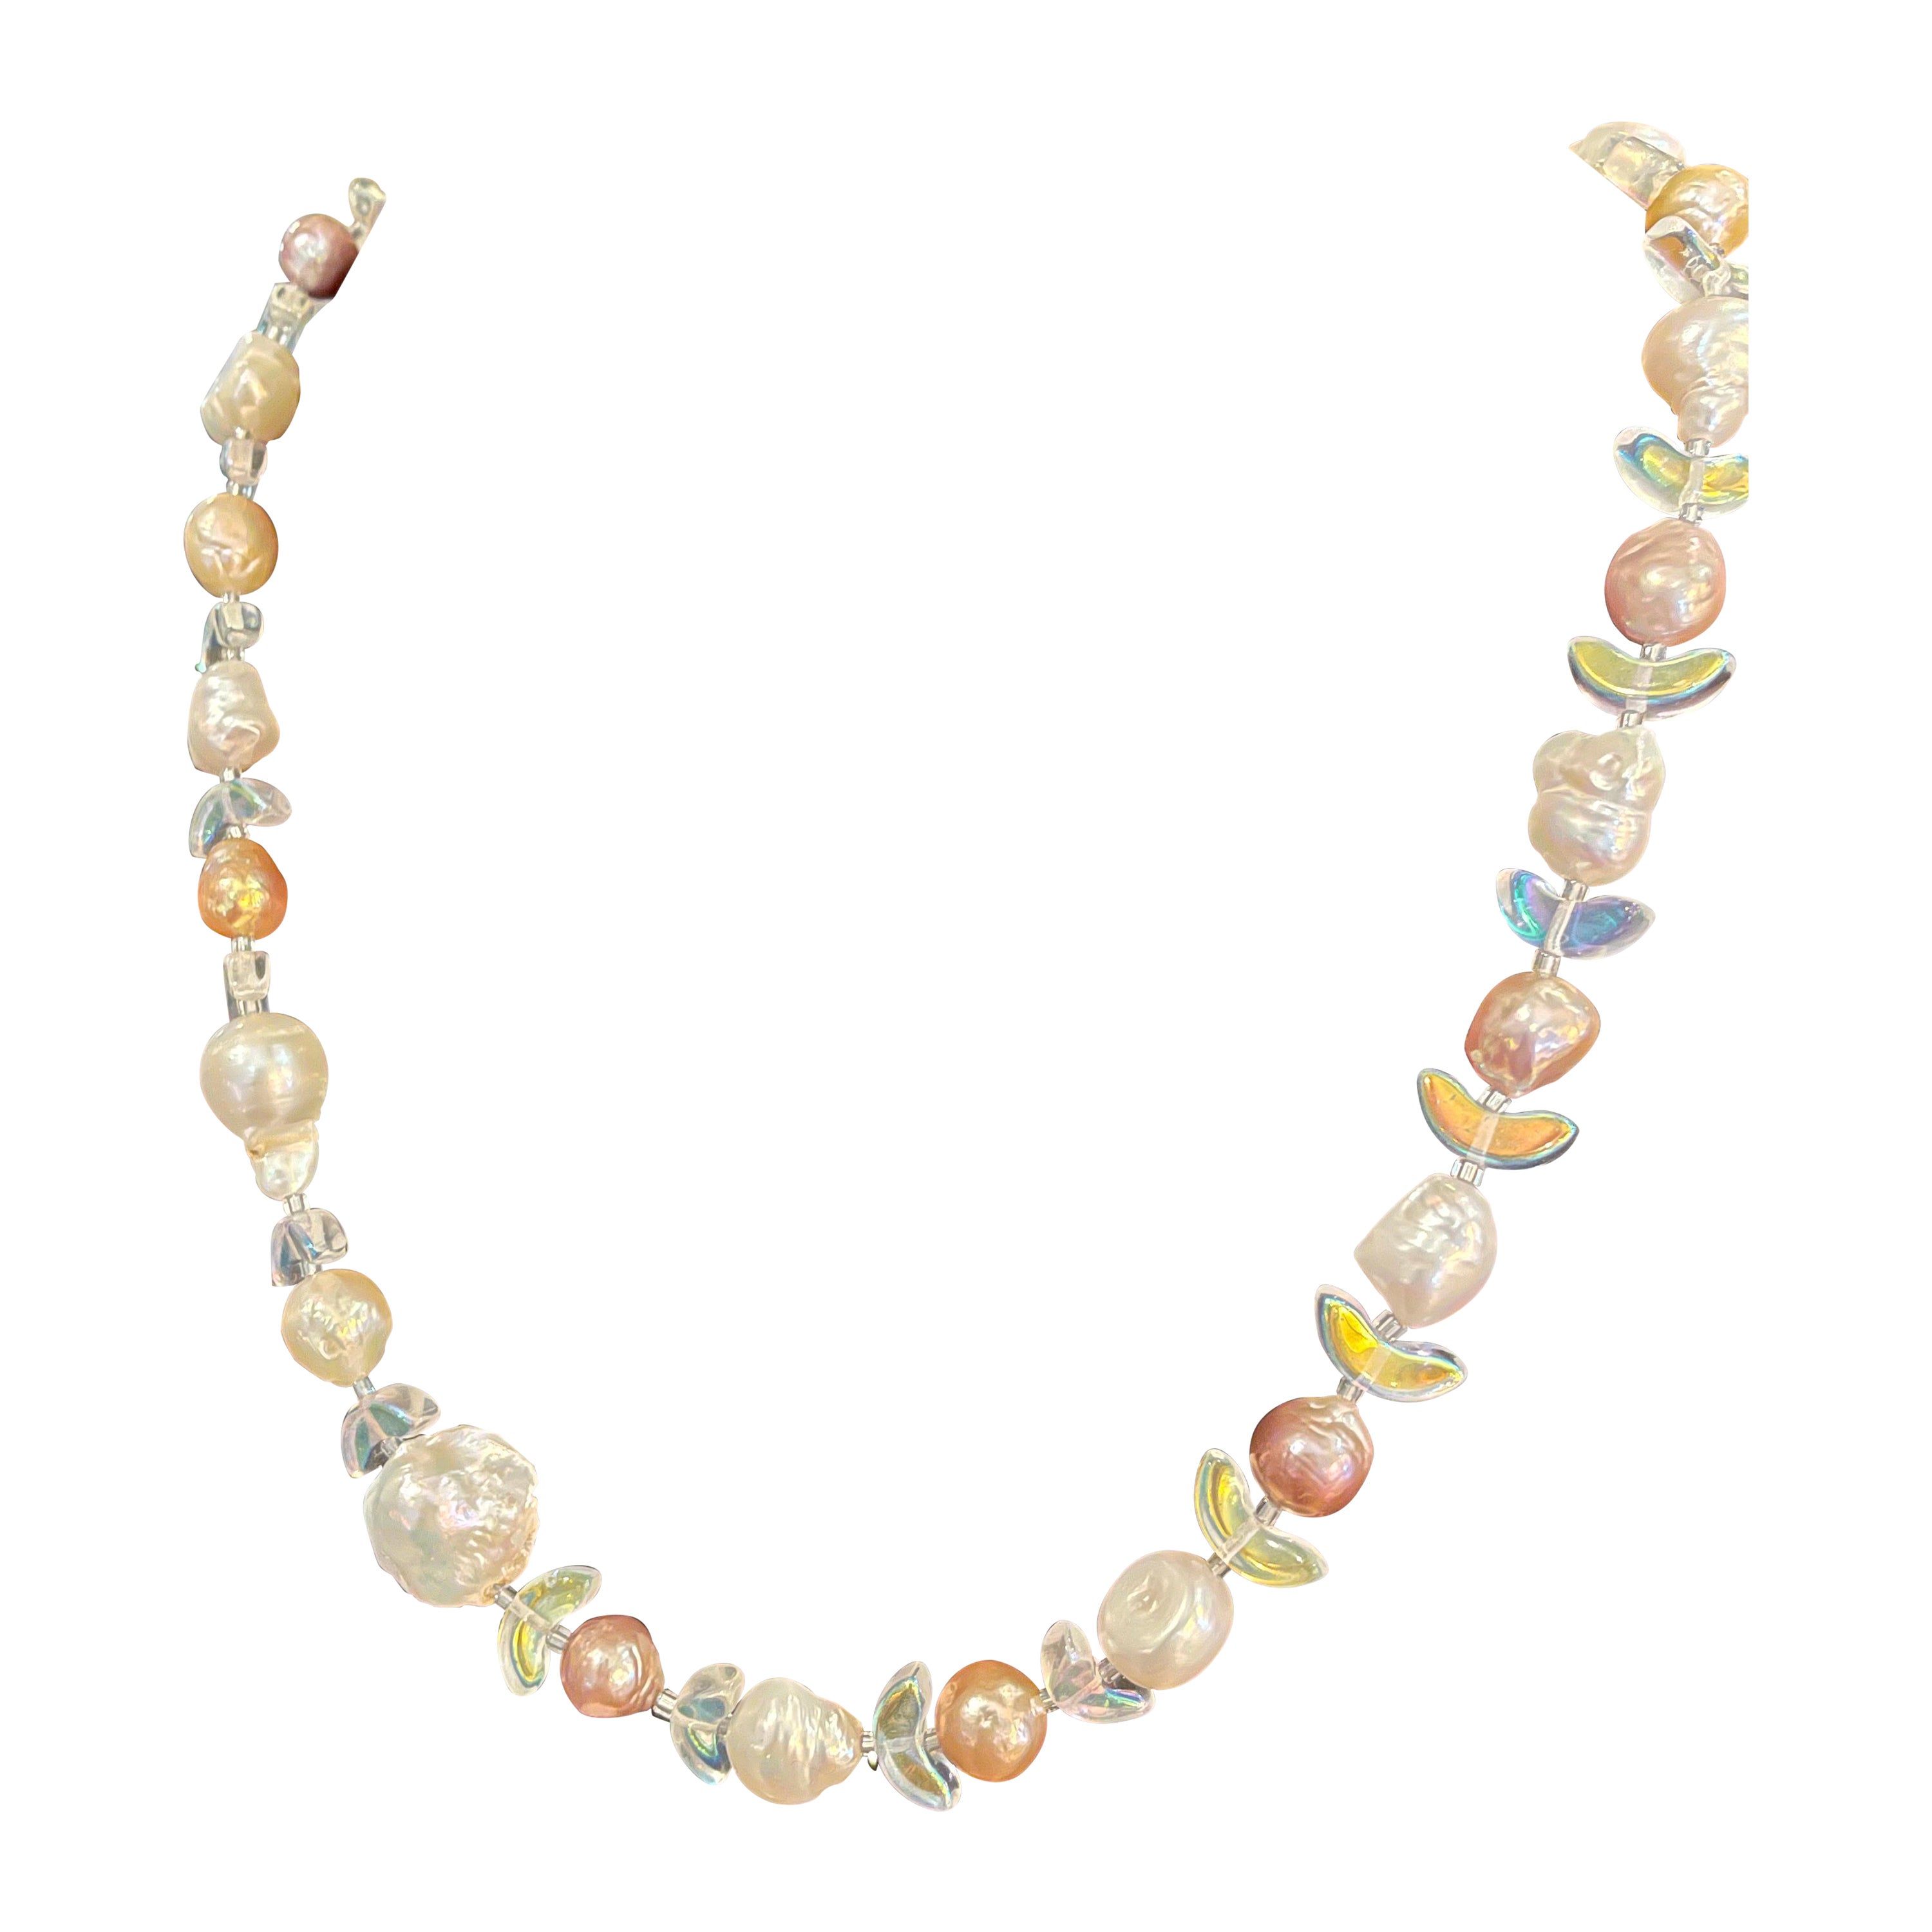 LB large Baroque Pearls Vintage Glass Stunning Handmade One of a Kind Necklace For Sale